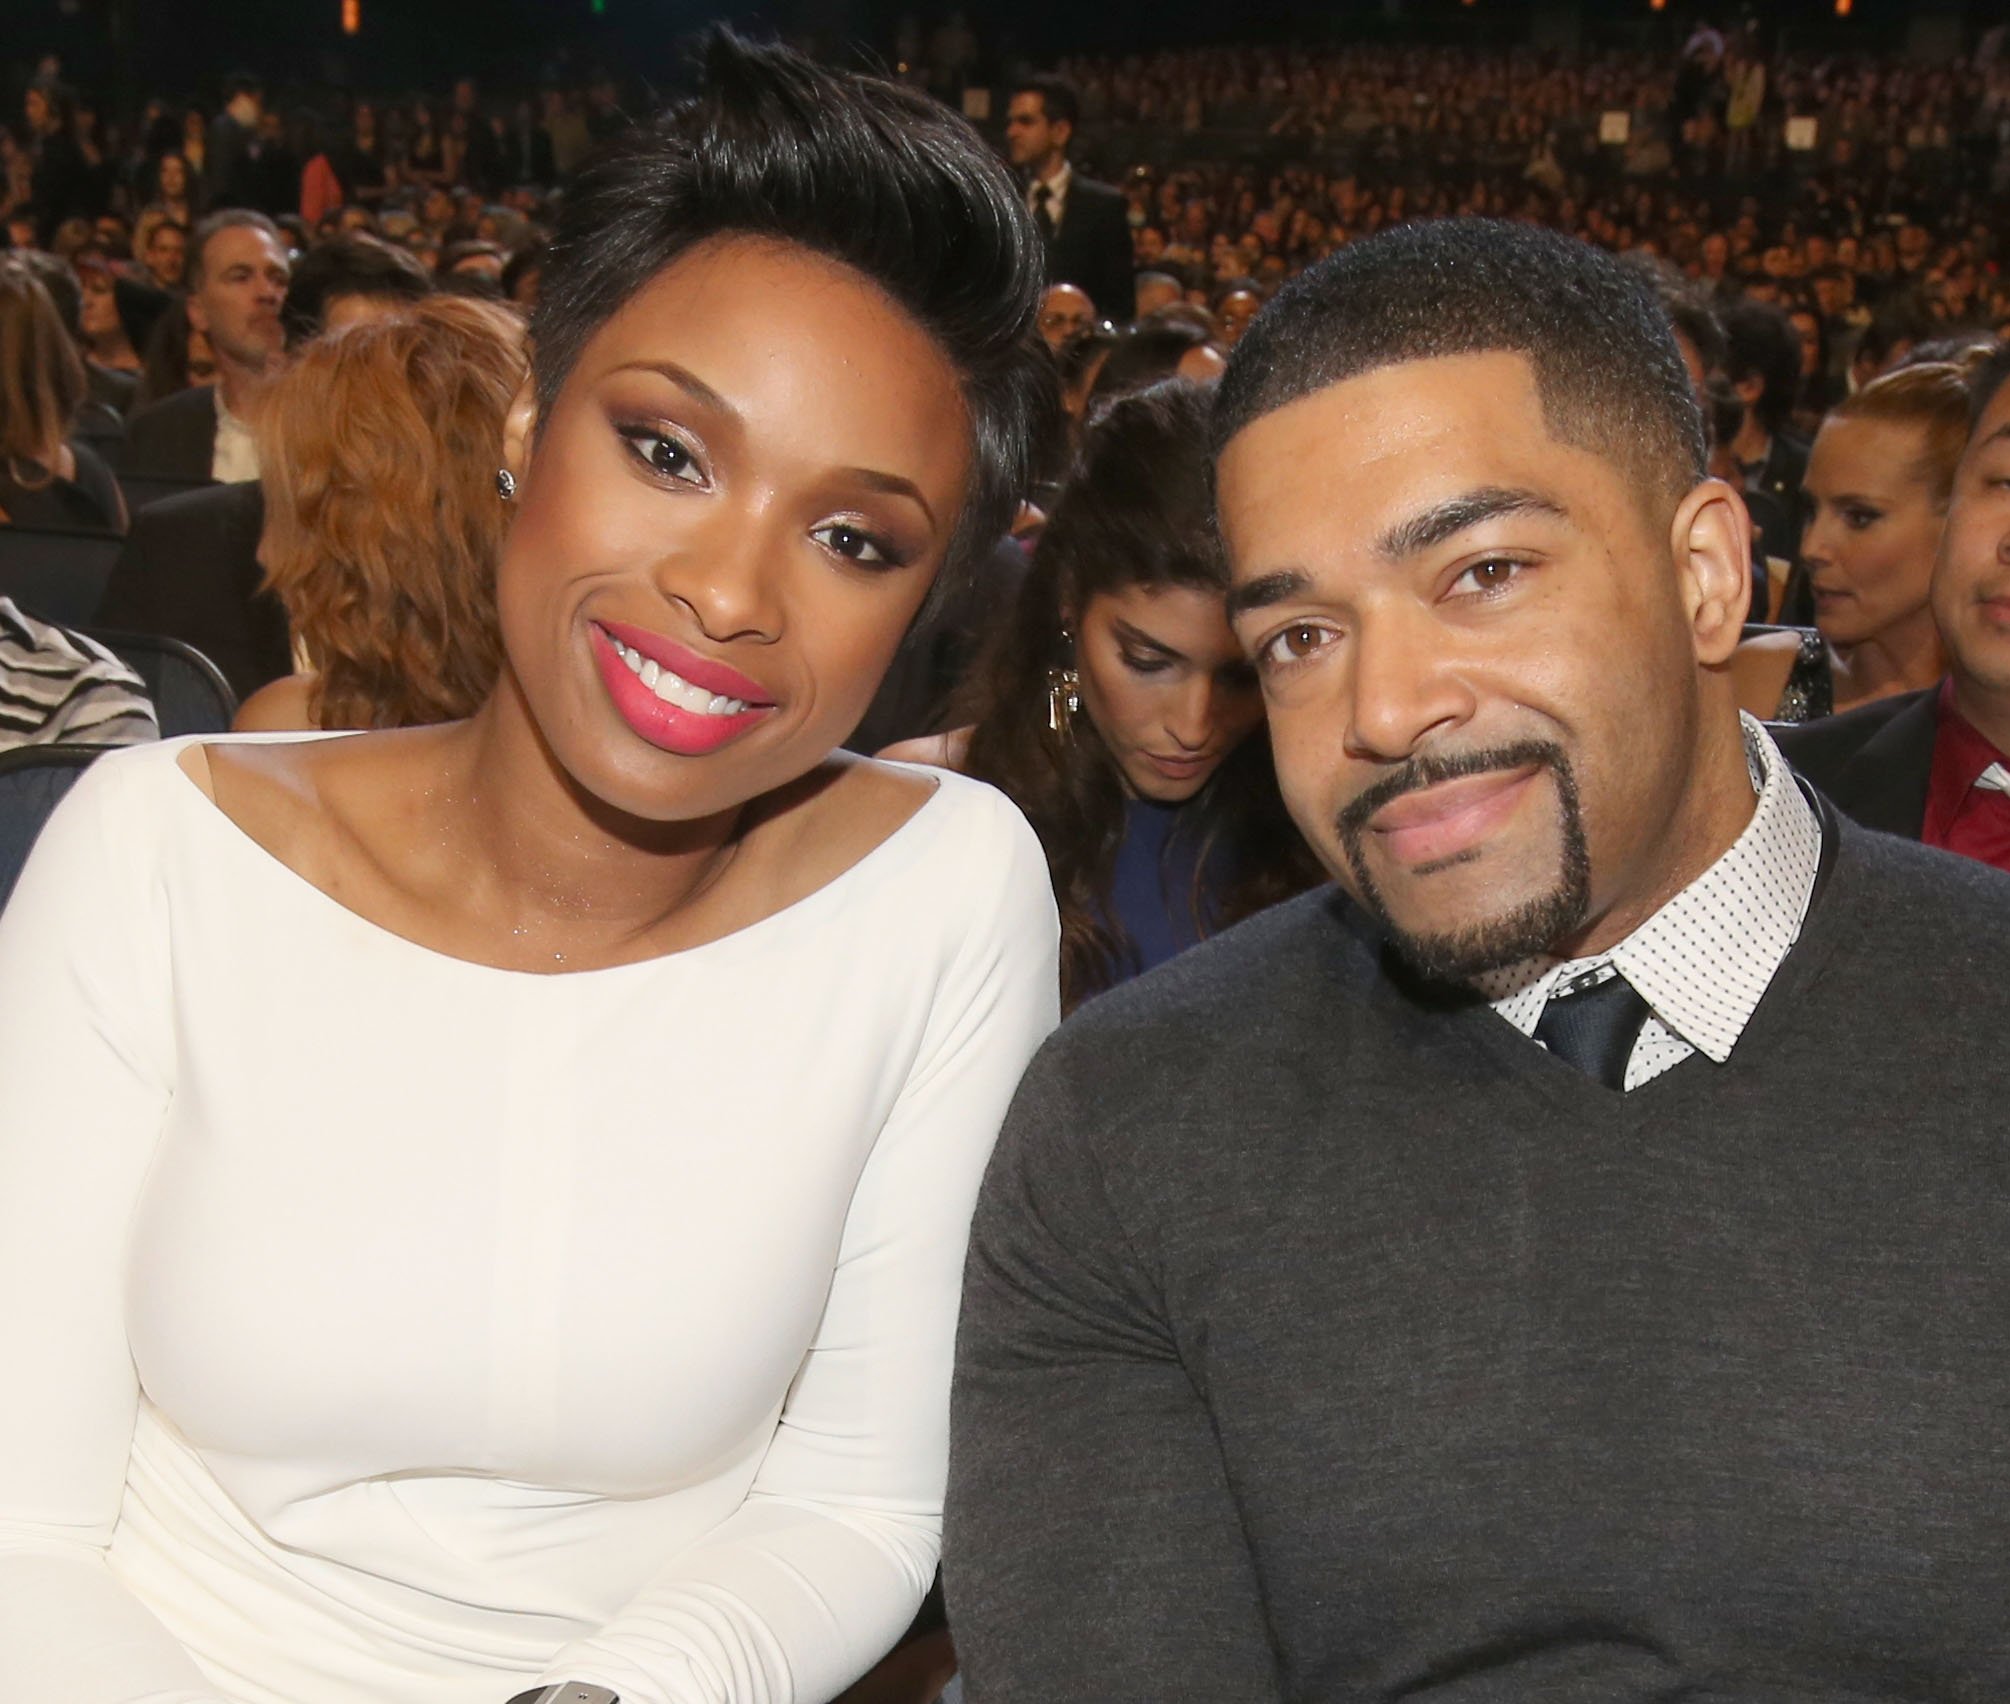 Jennifer Hudson and David Otunga at the 40th Annual People's Choice Awards in January 2014. | Photo: Getty Images